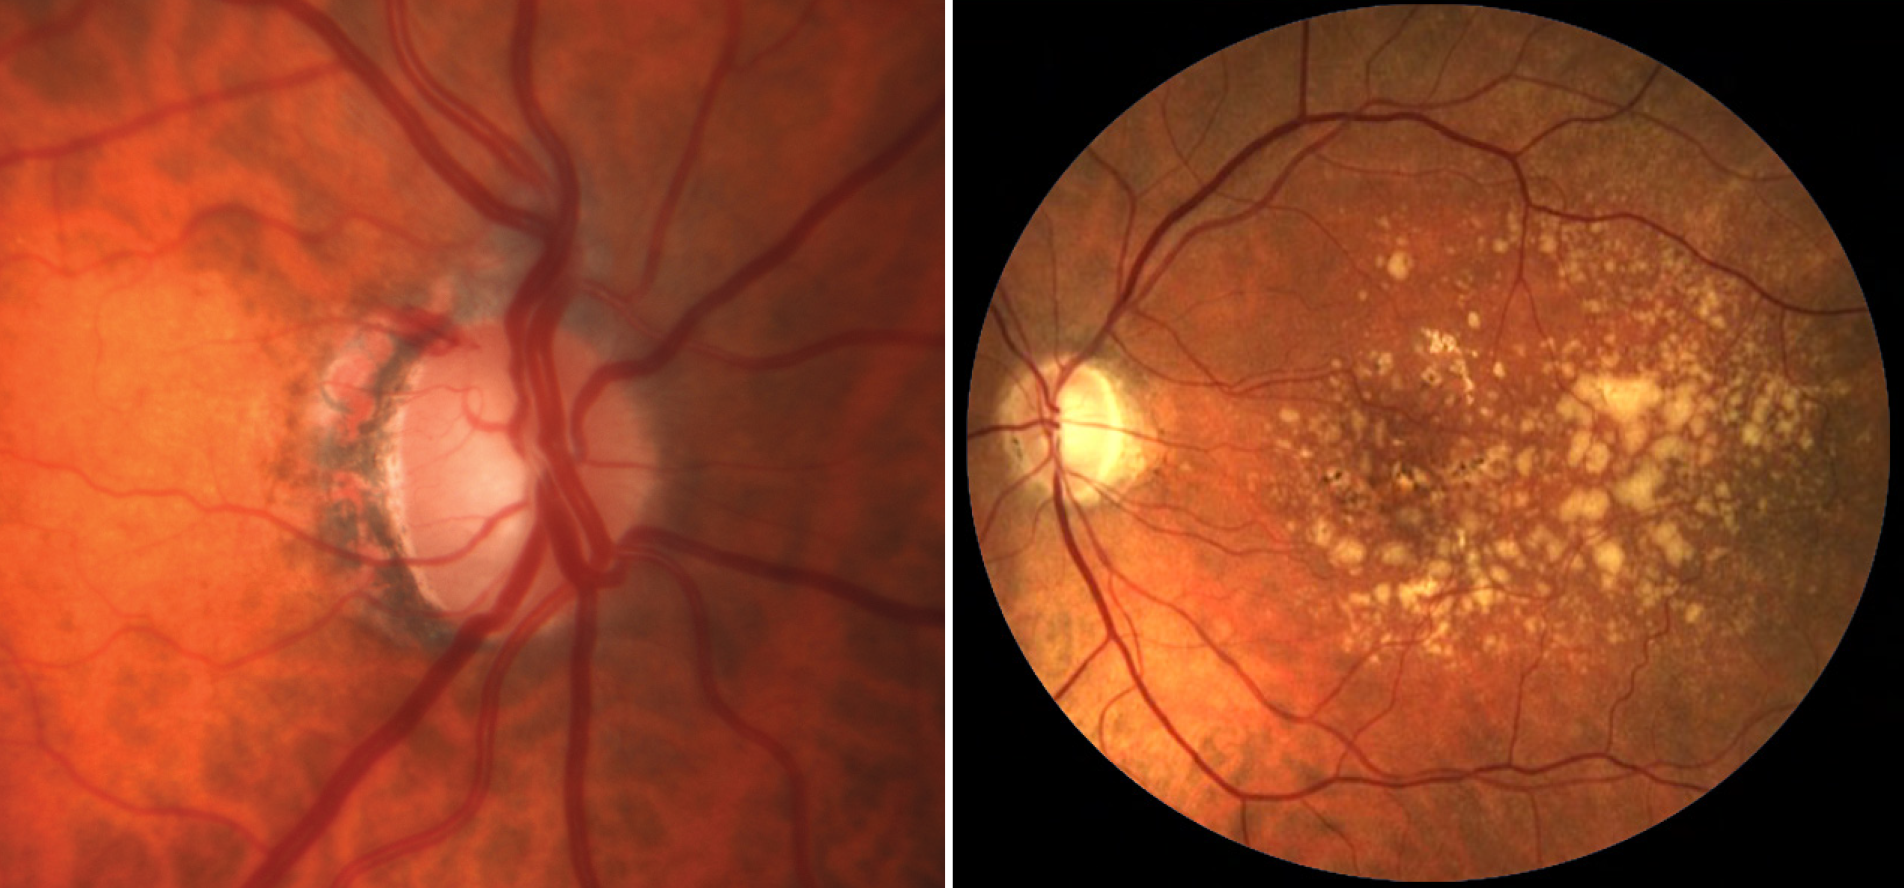 Diabetes medications such as metformin and insulin were associated with a lower risk of open-angle glaucoma or AMD.